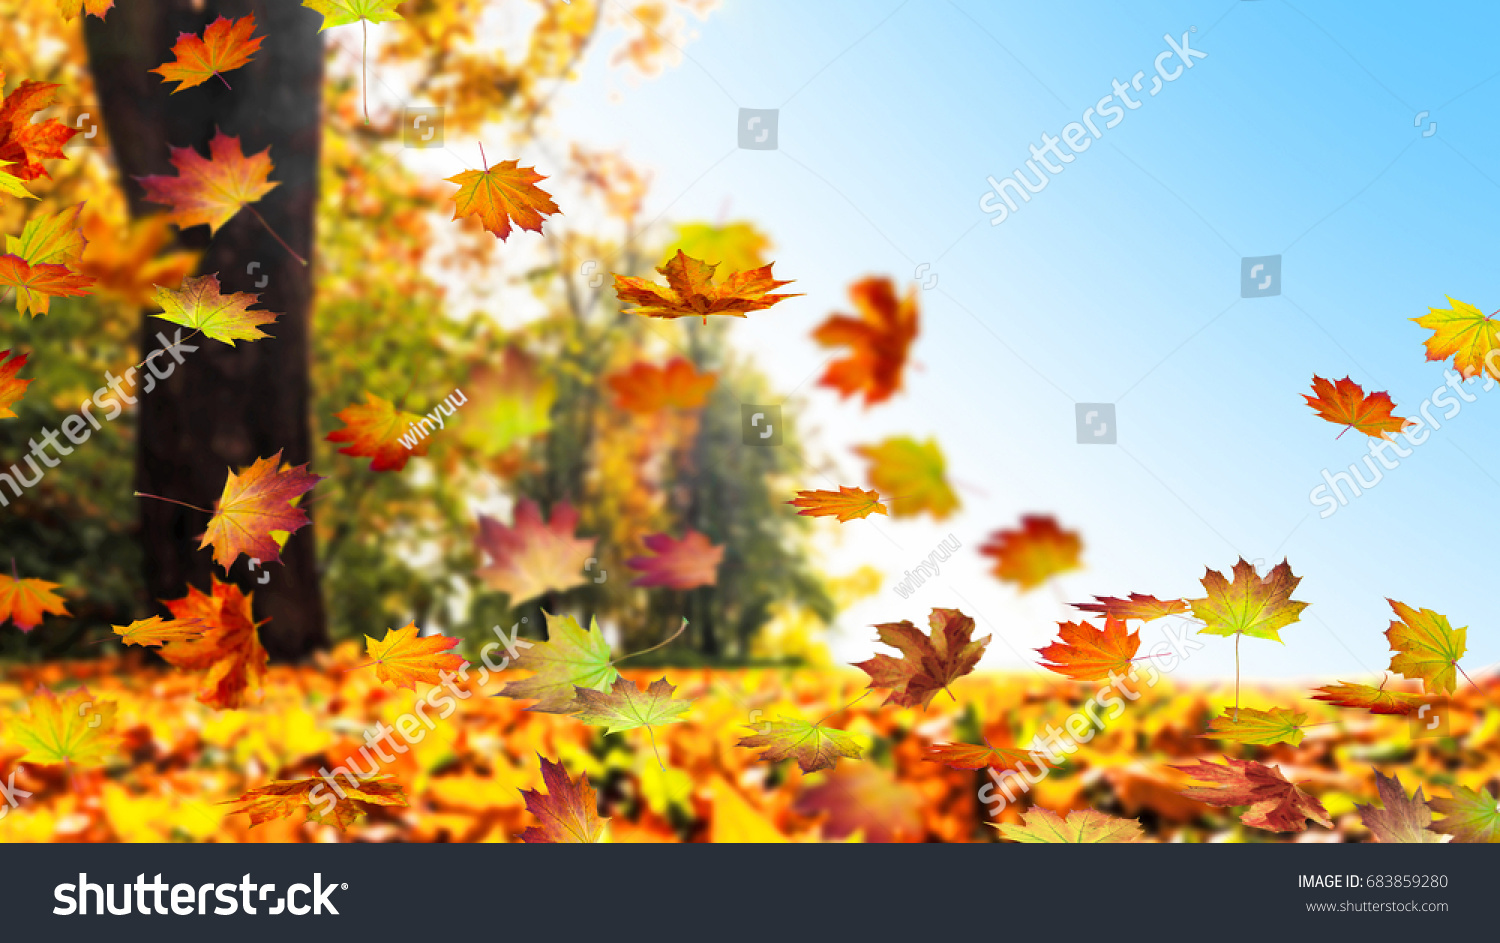 fall leaf in autumn, colorful maple leaves falling down from tree against blue sky, foliage on the ground, cheerful autumn day in an idyllic landscape, golden october concept #683859280